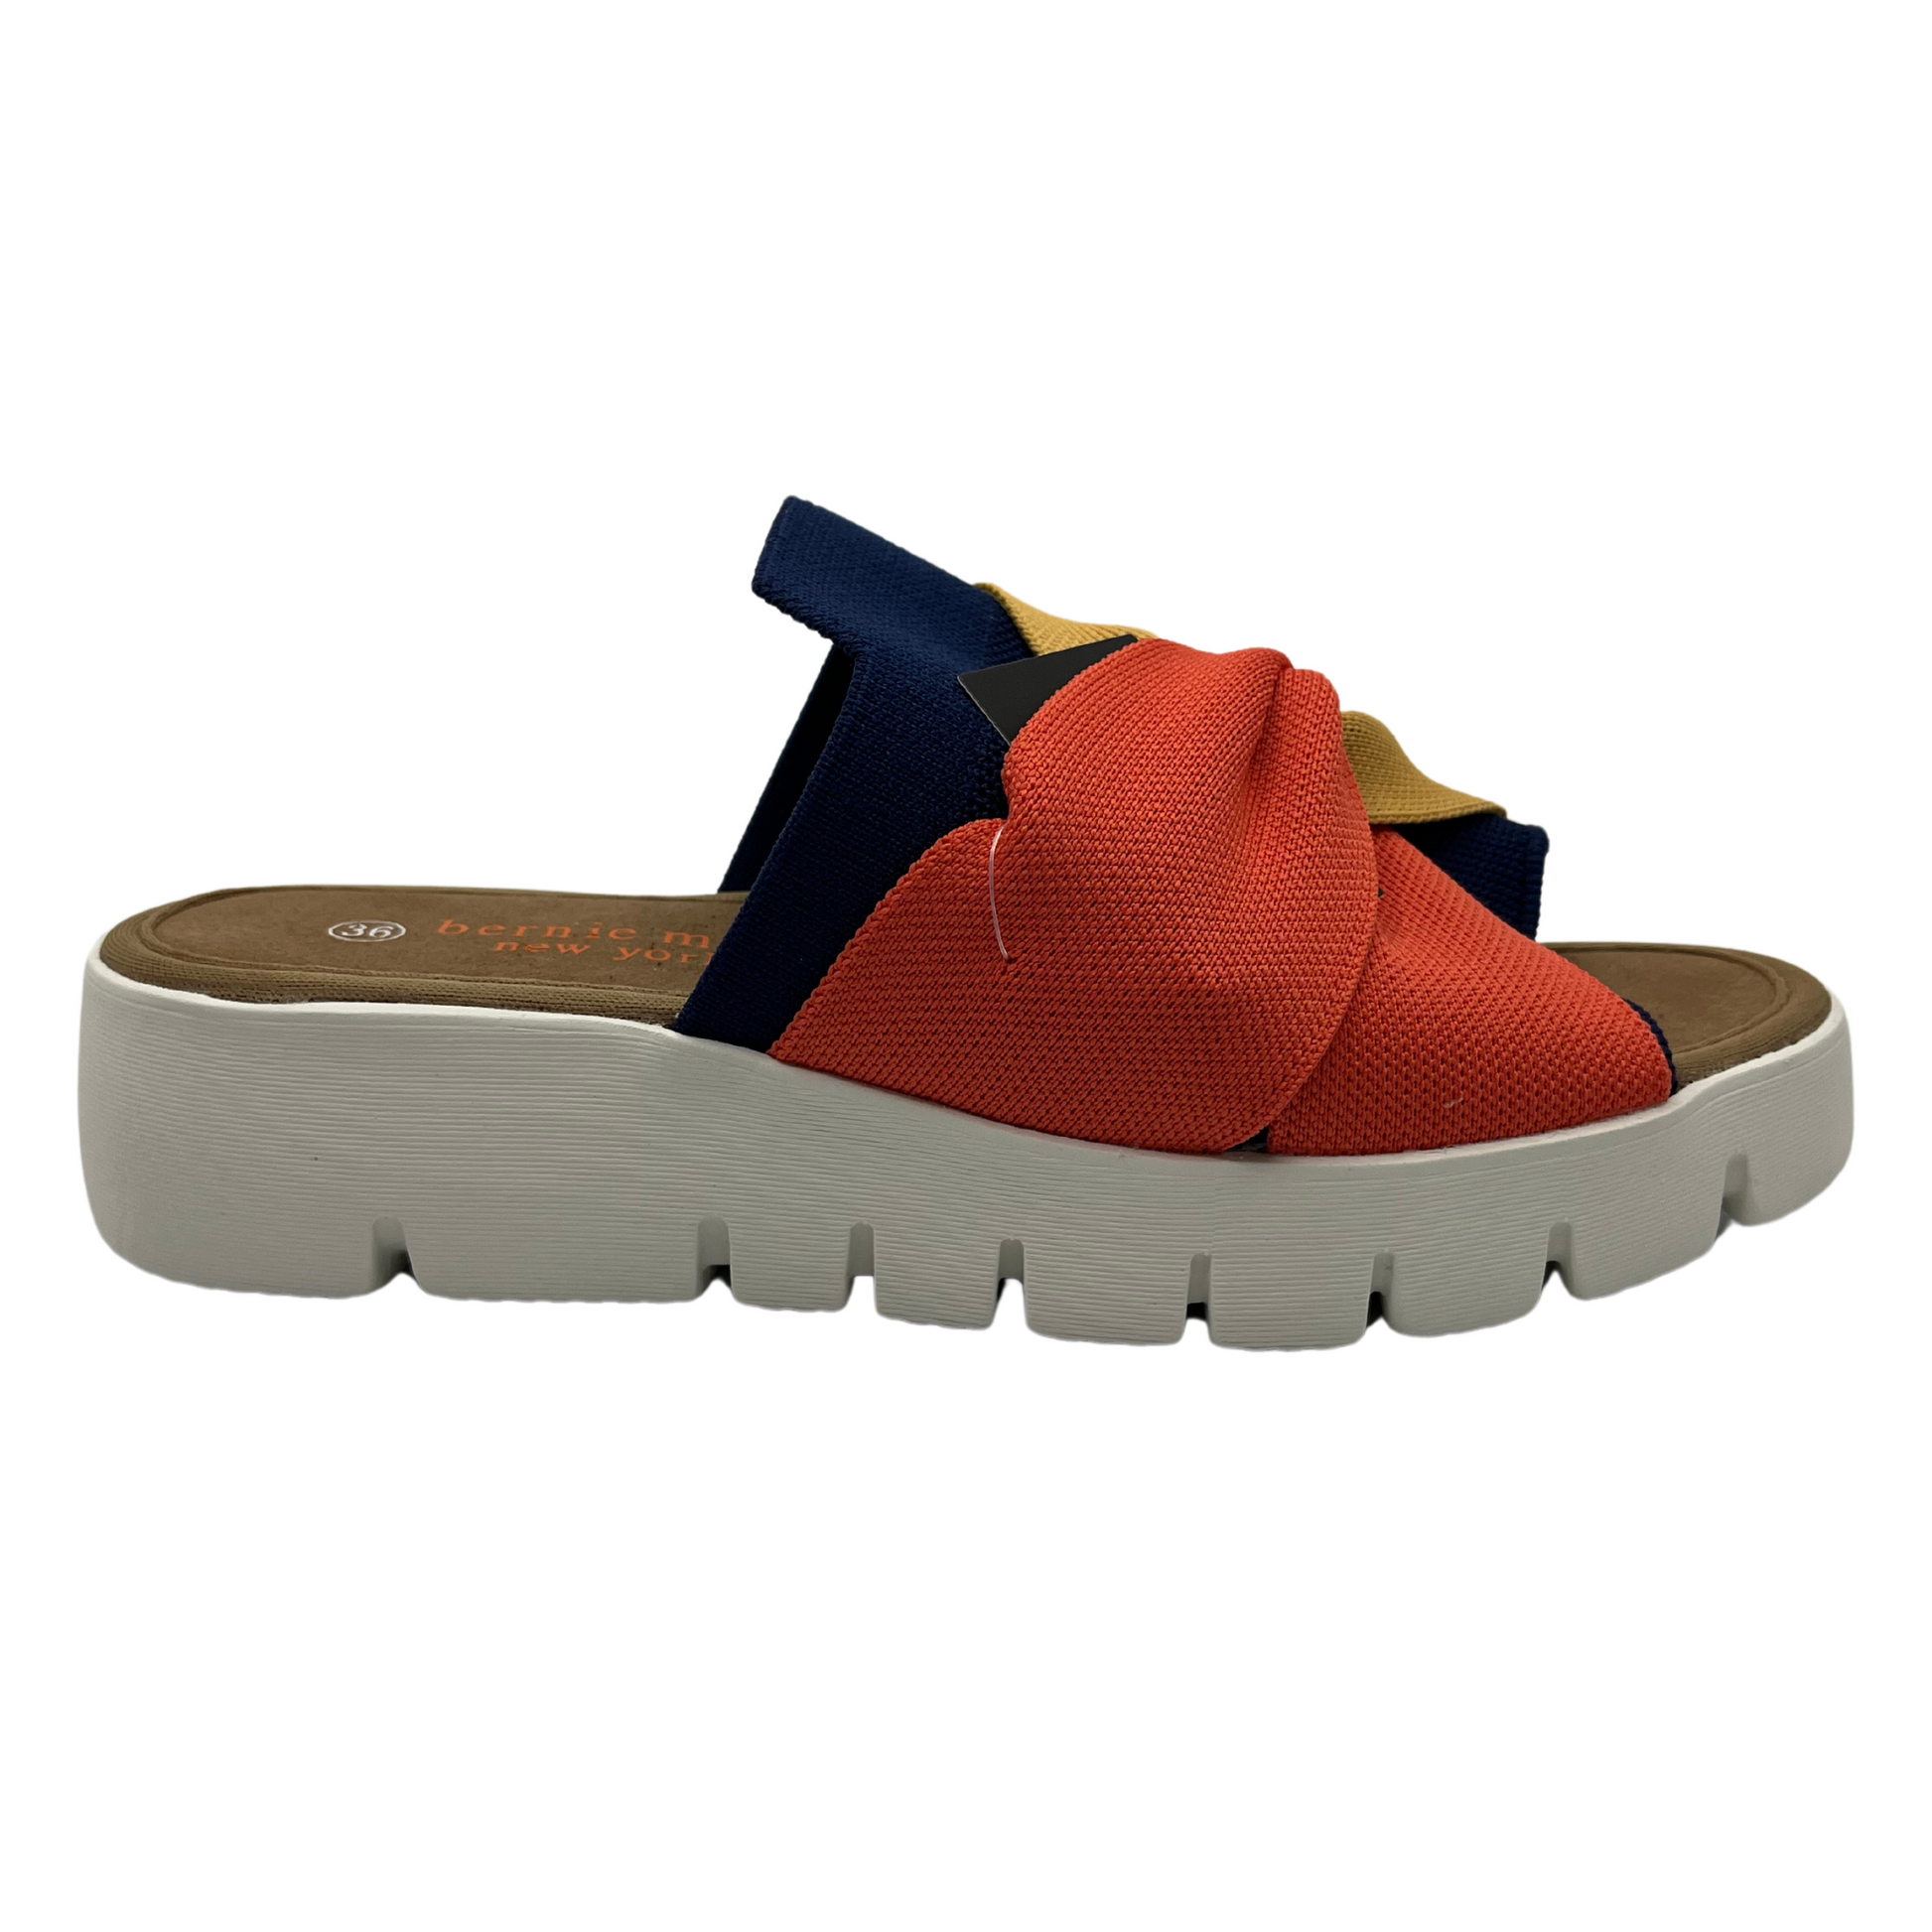 Right facing view of mustard, navy and nectarine elastic strap sandal with white rubber outsole